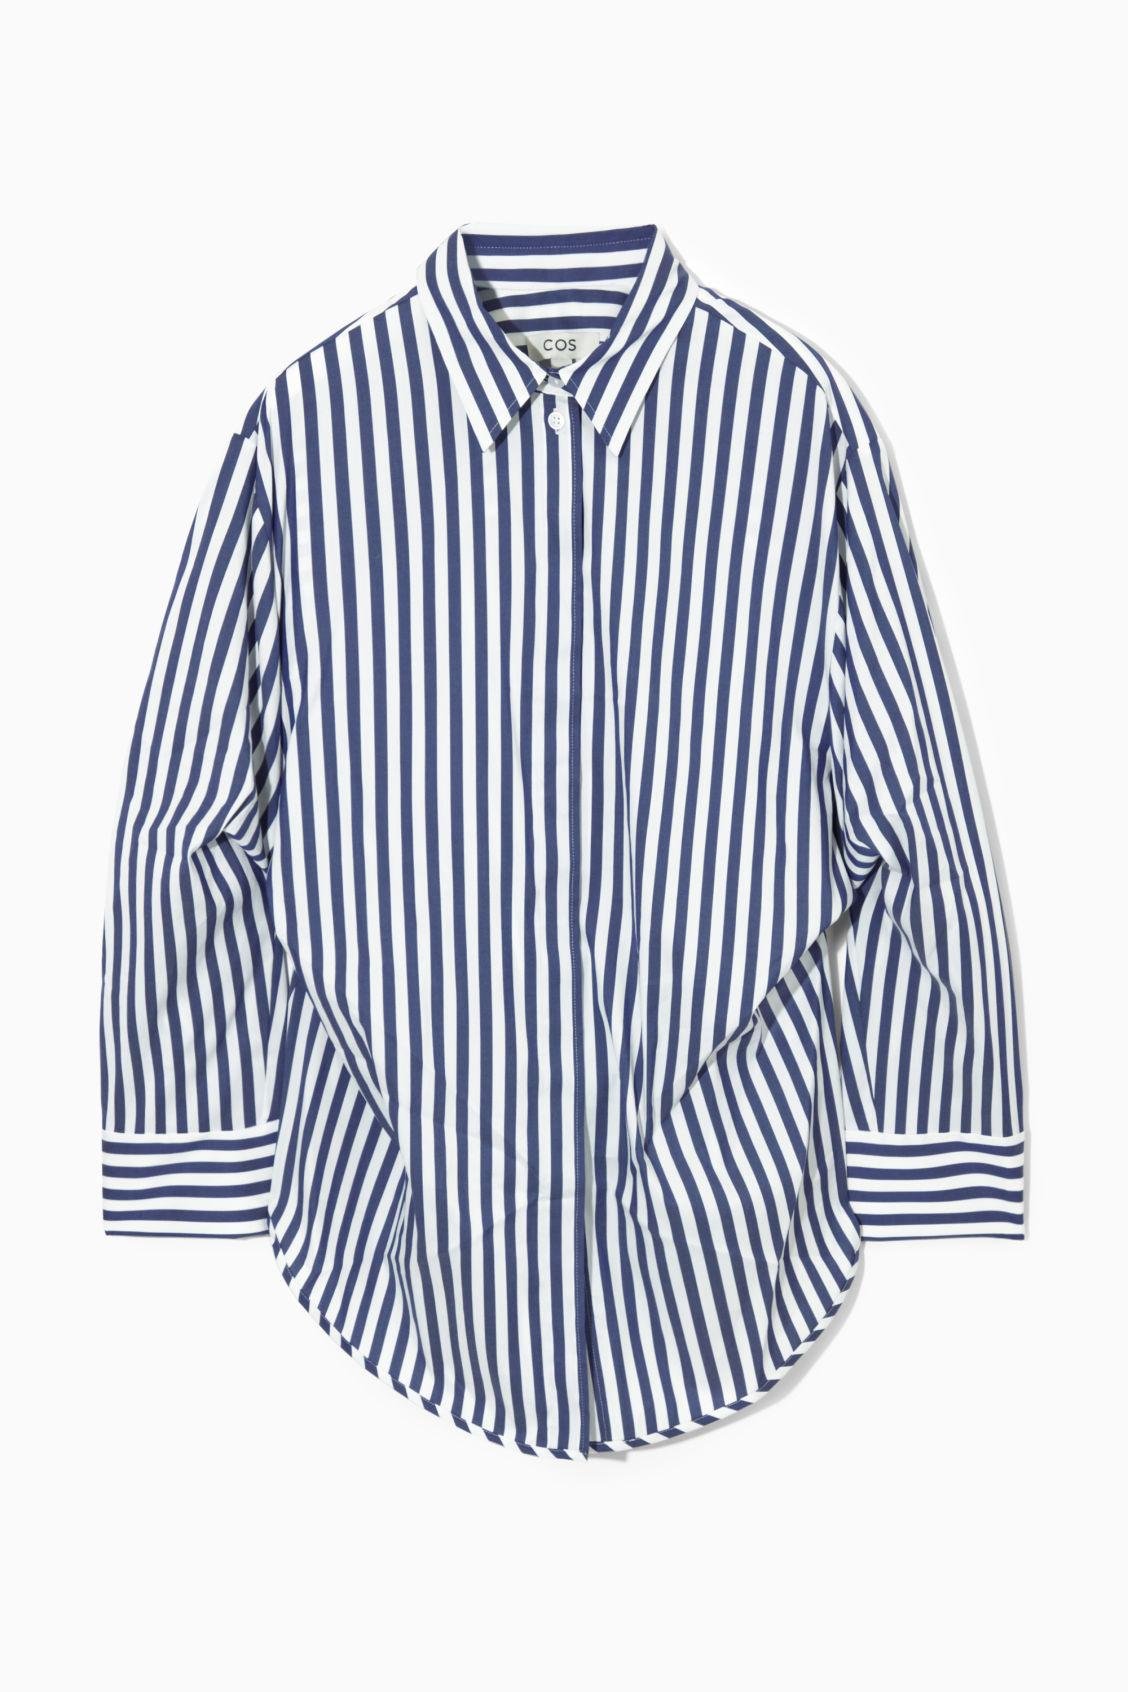 COS Oversized Waisted Striped Shirt in Blue